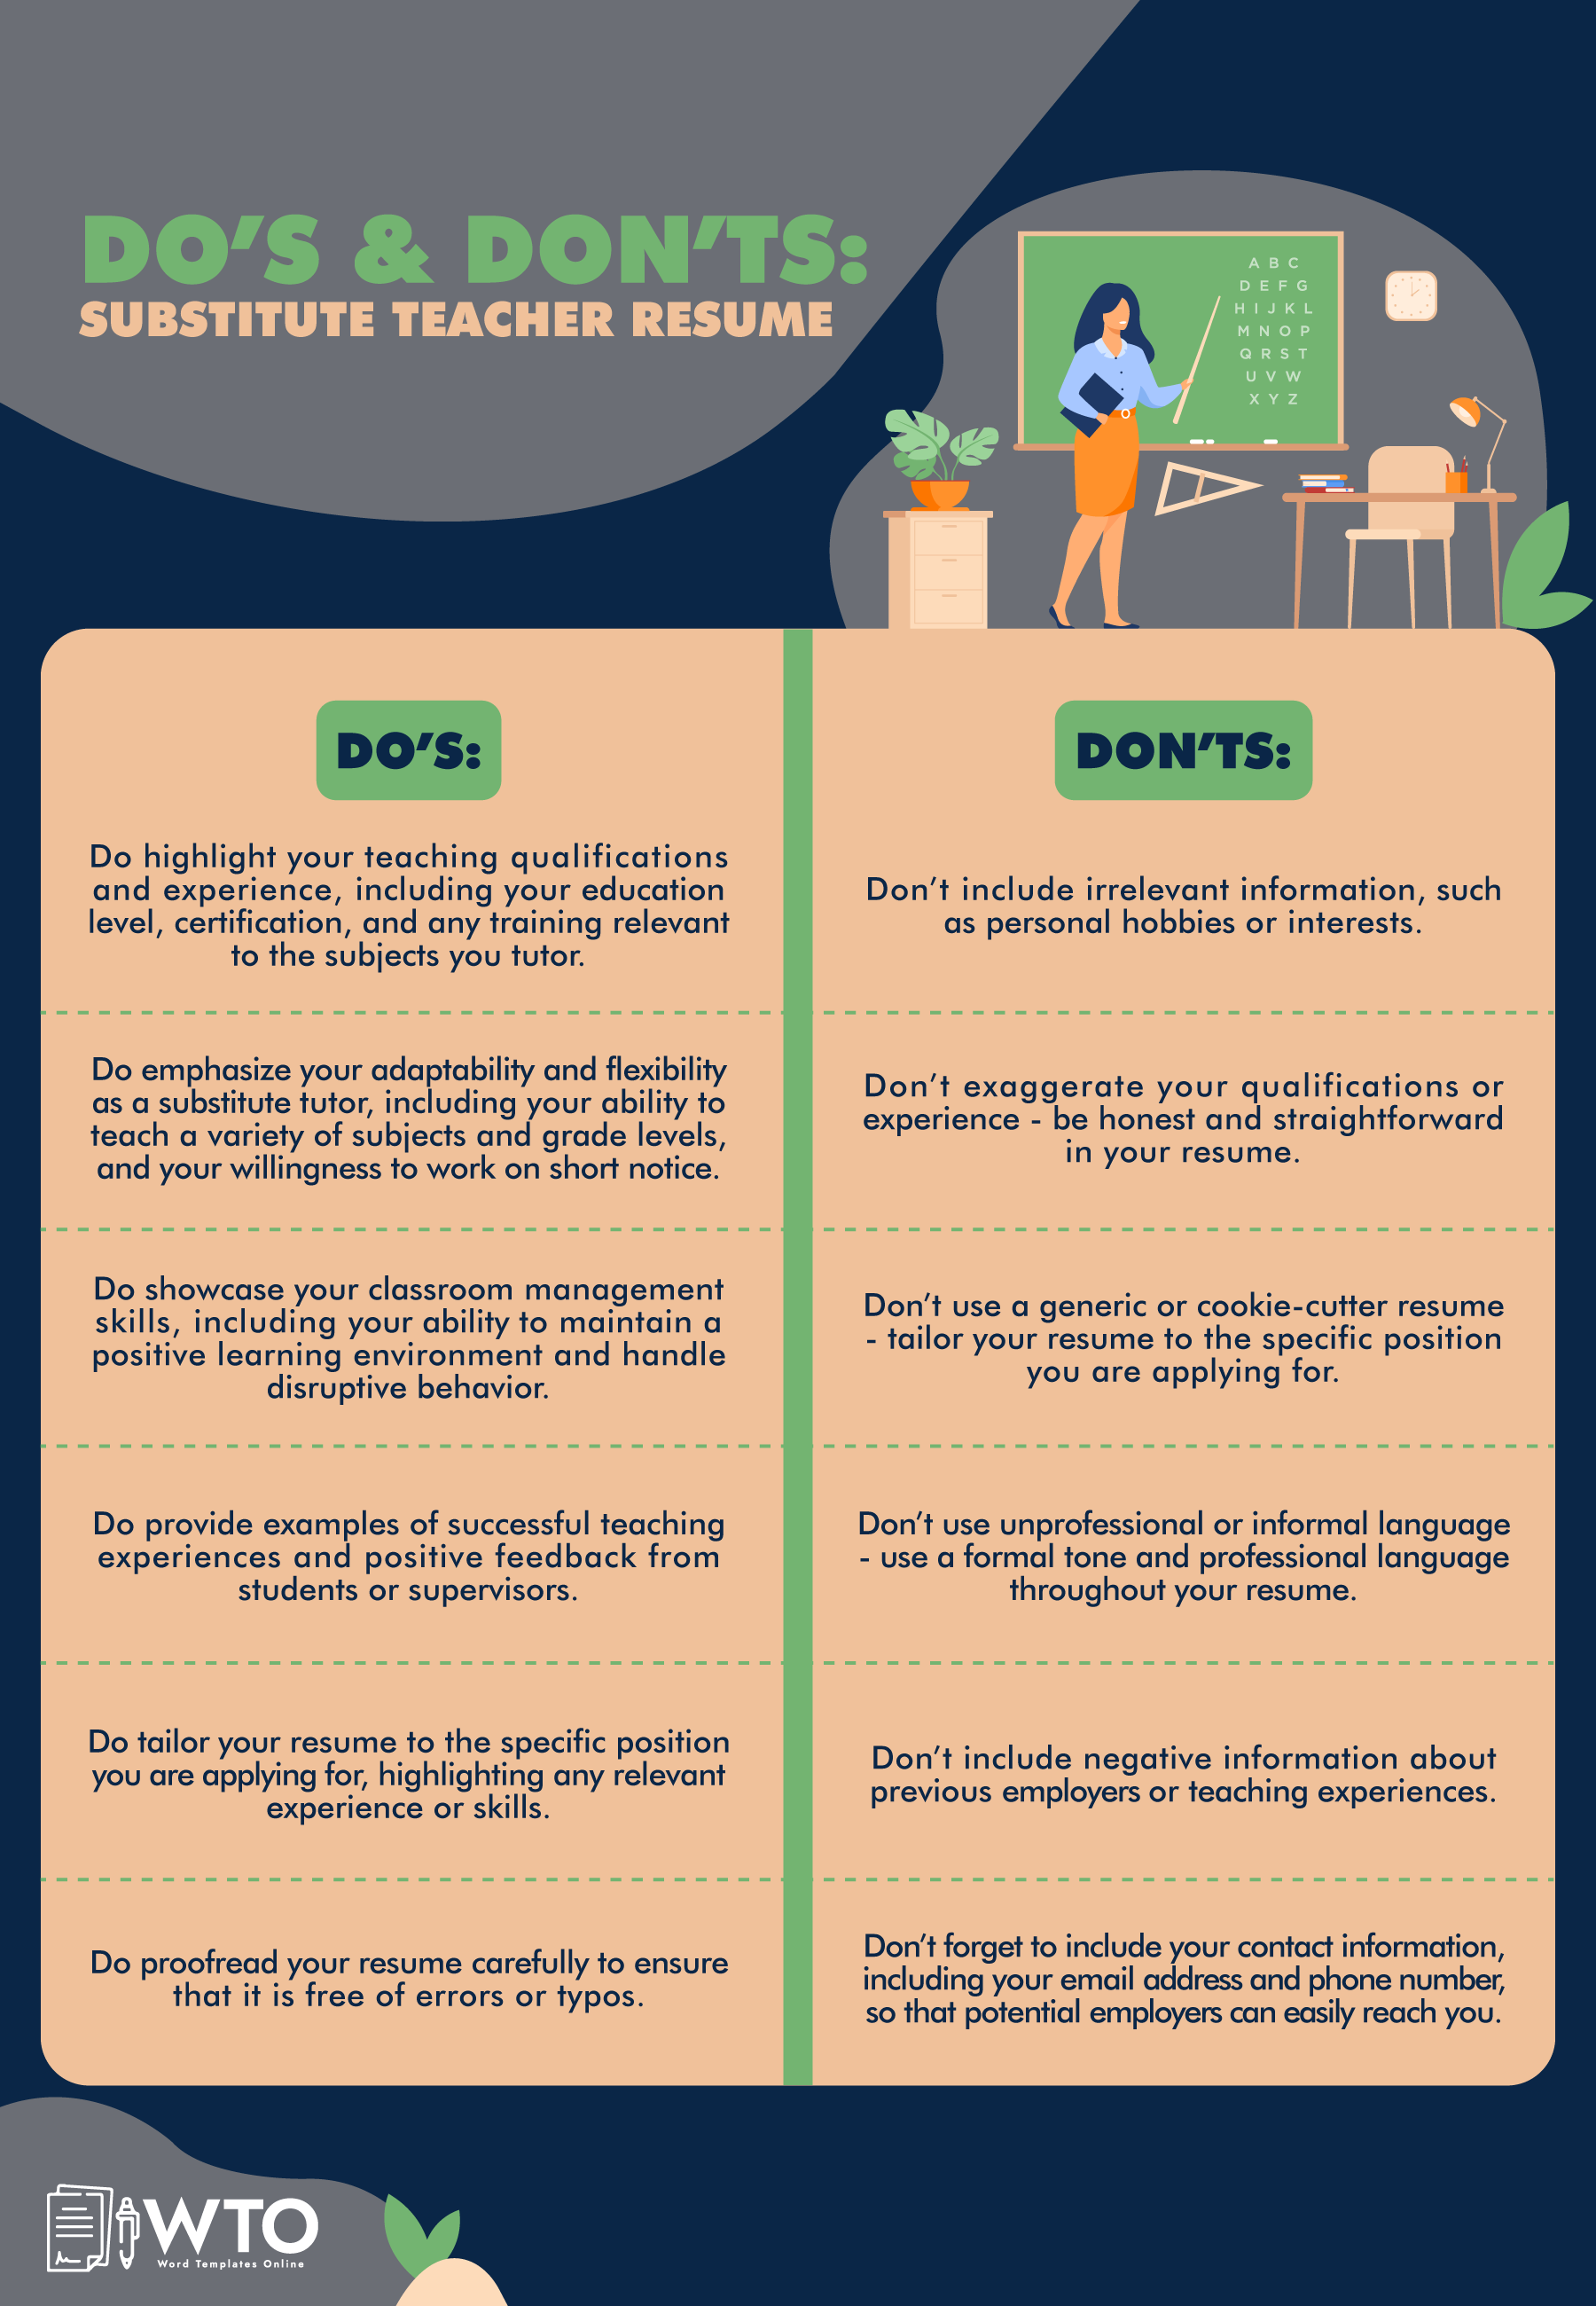 This infographic is about the Do's and Don'ts of a Substitute Teacher Resume.